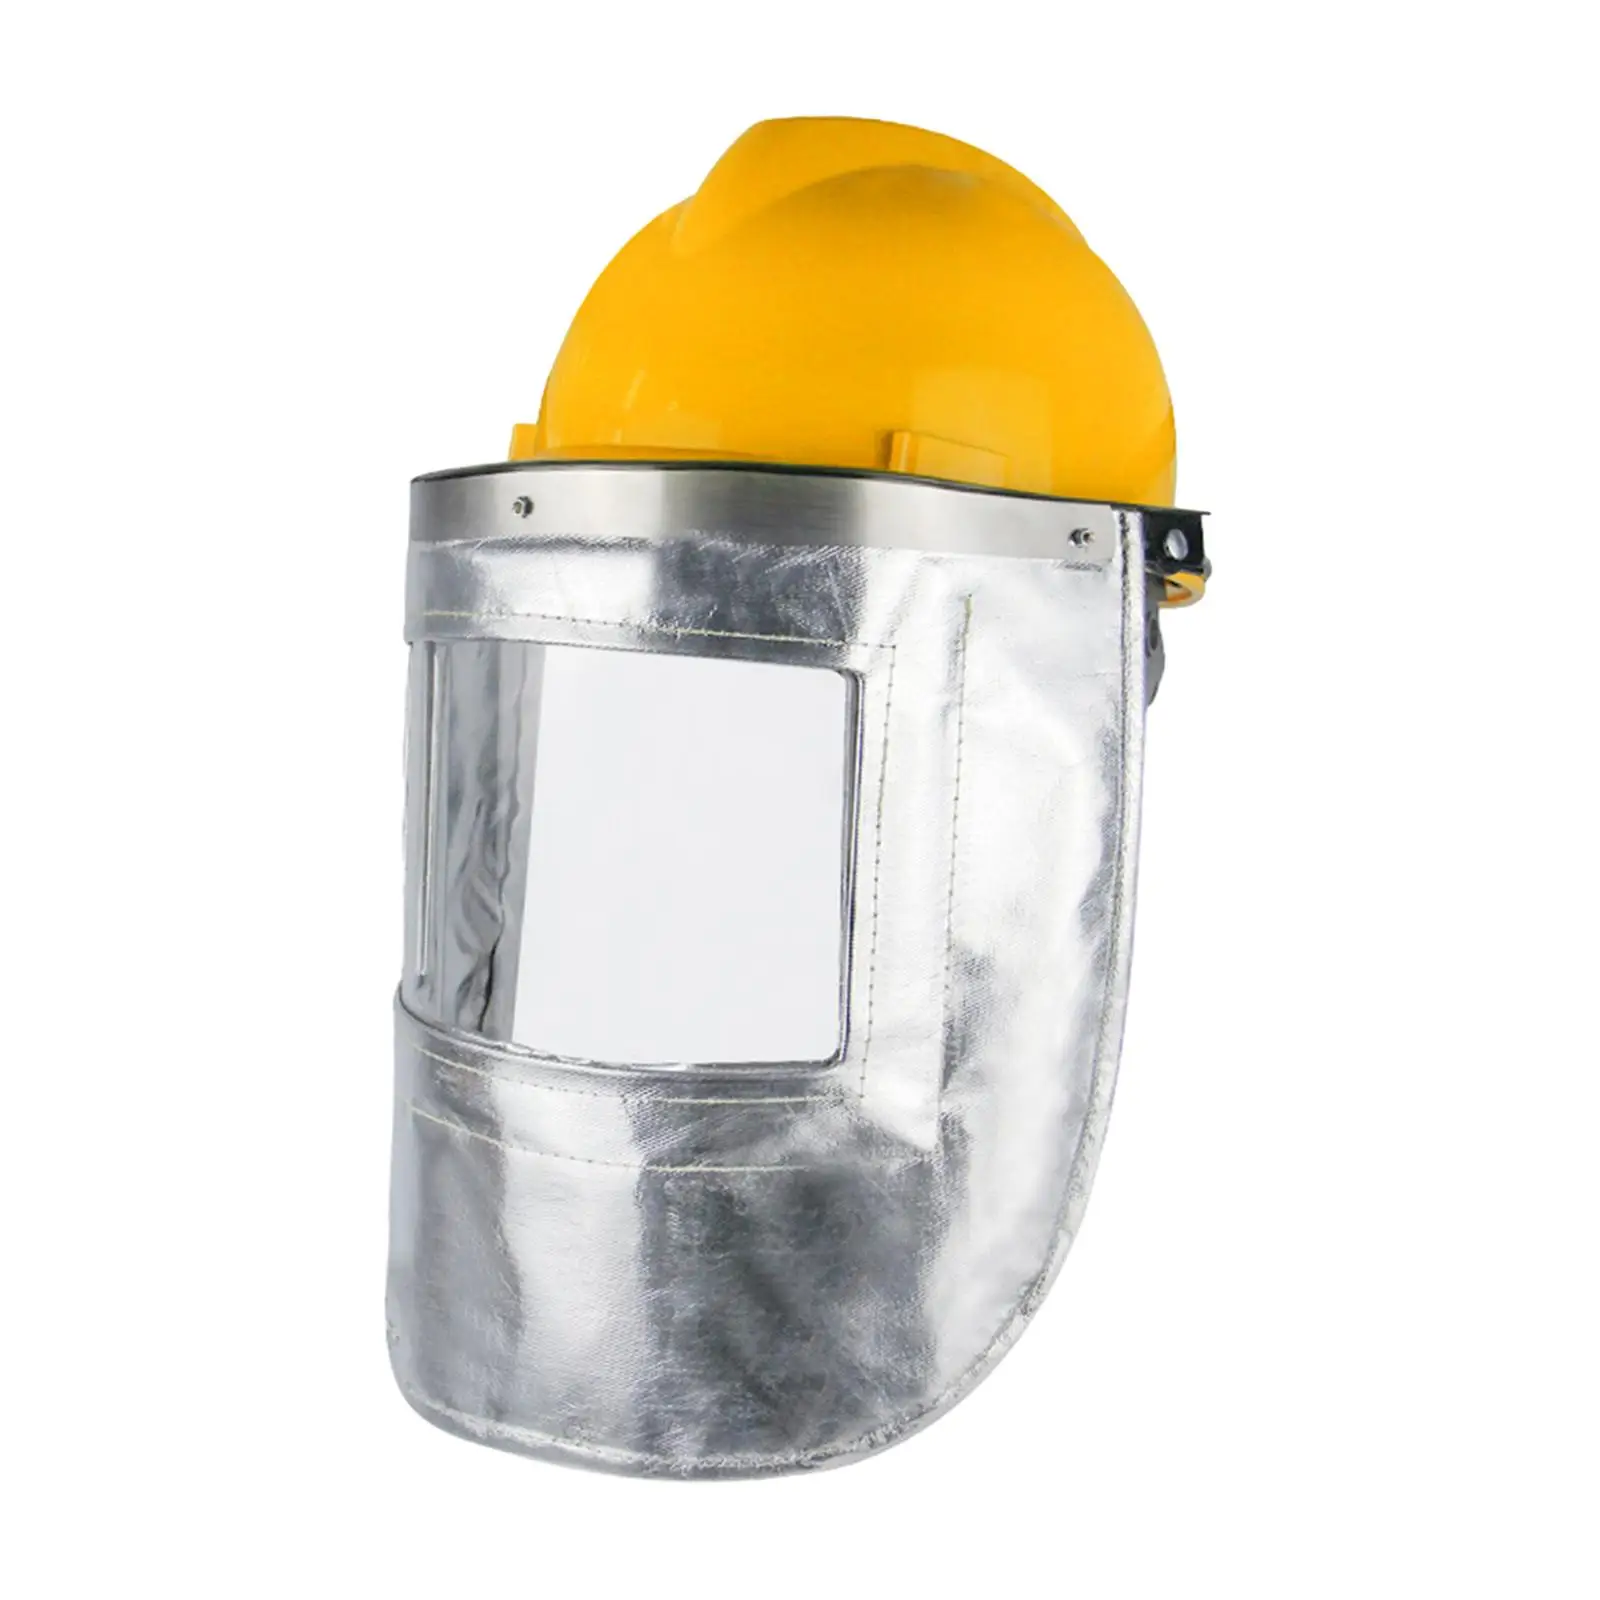 Welding Mask Hood Welder Face Cover Versatile Face Protector Anti Splash for Chainsaw, Forestry Gardening Sturdy Accessory